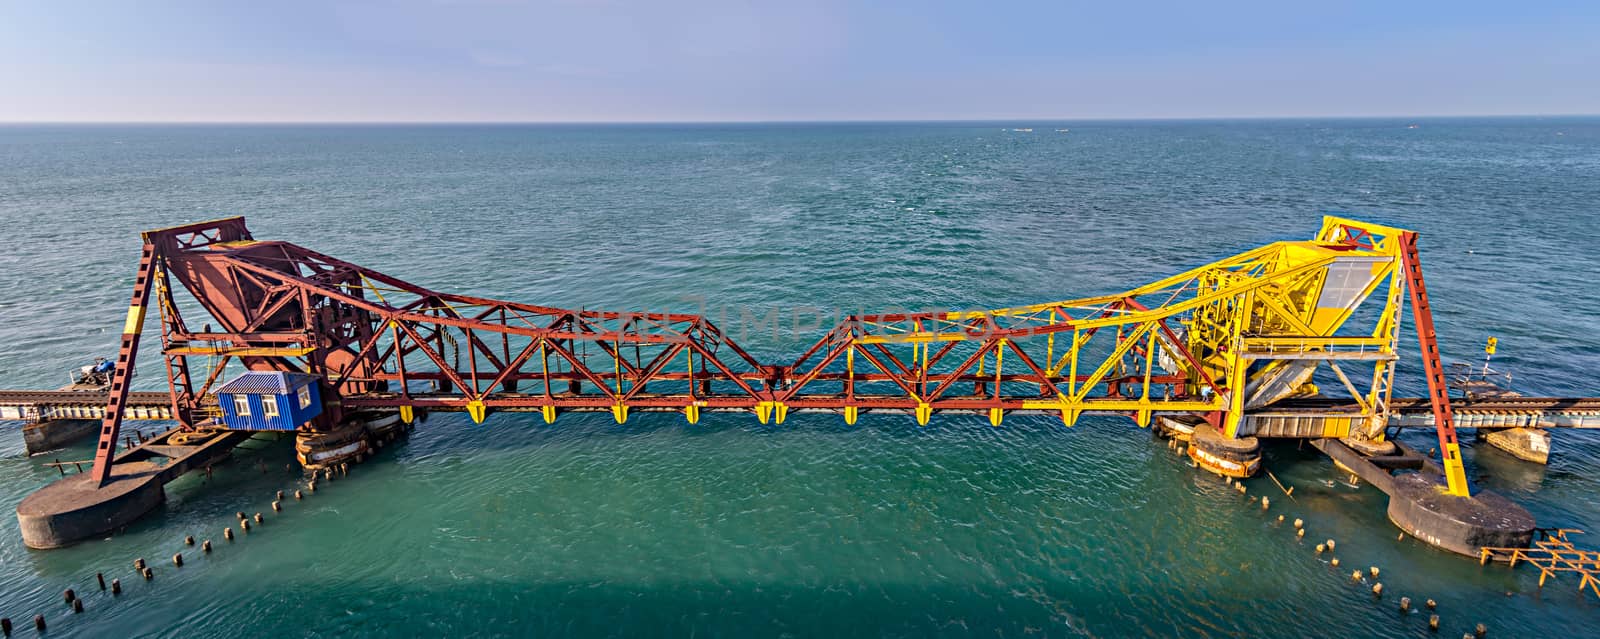 Pamban Bridge is a railway bridge which connects the town of Mandapam in mainland India with Pamban Island, and Rameswaram.